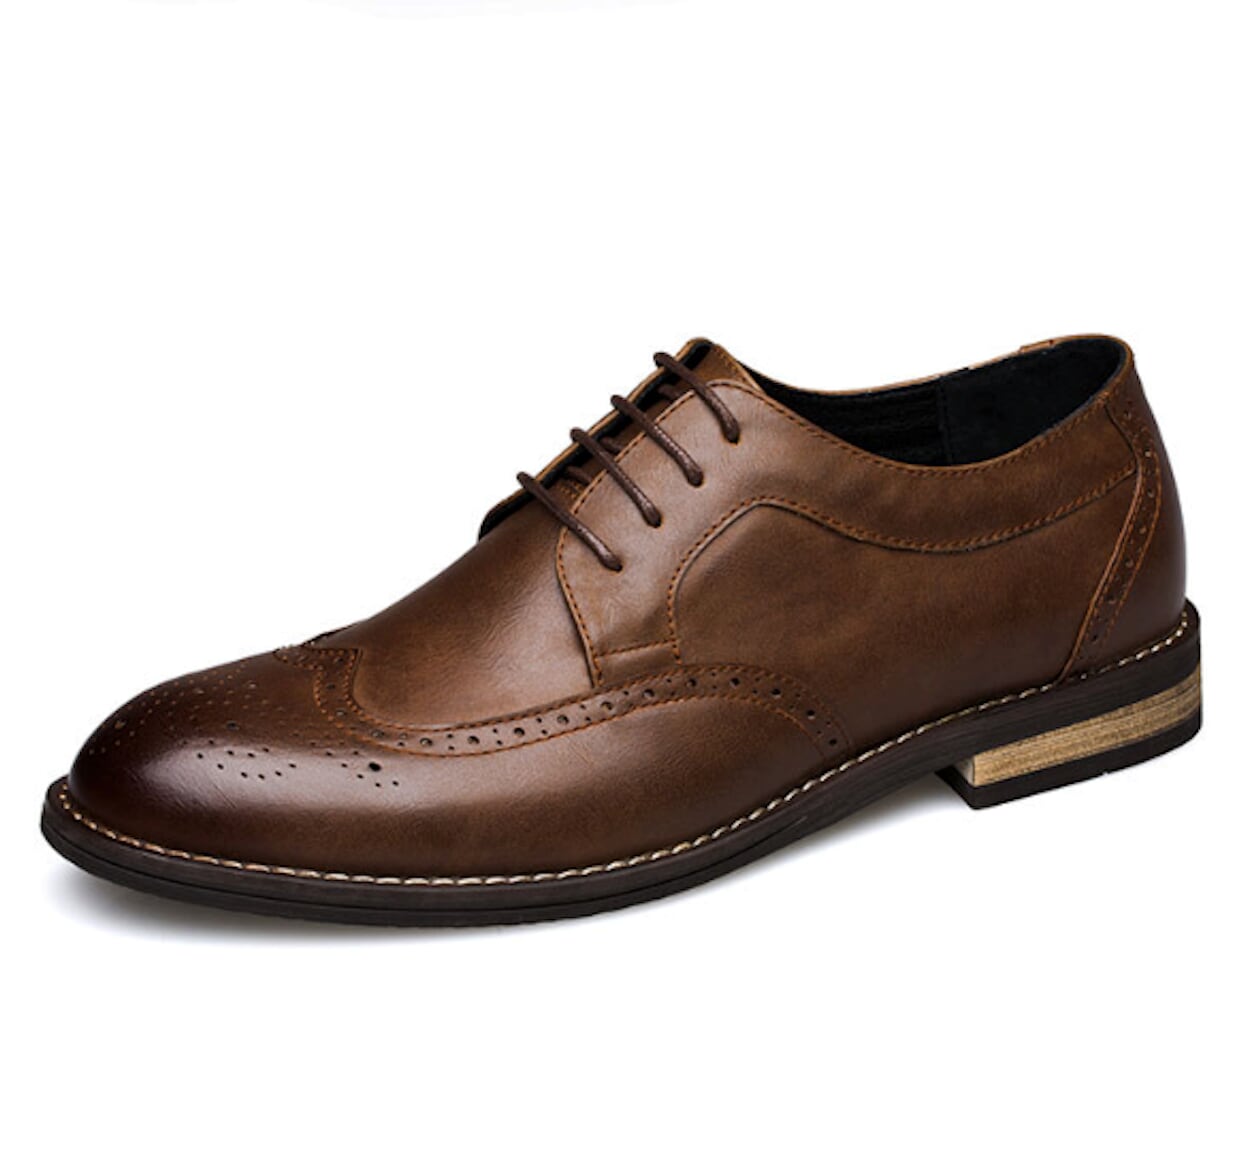 Mens Classic Wingtip Oxford Shoes